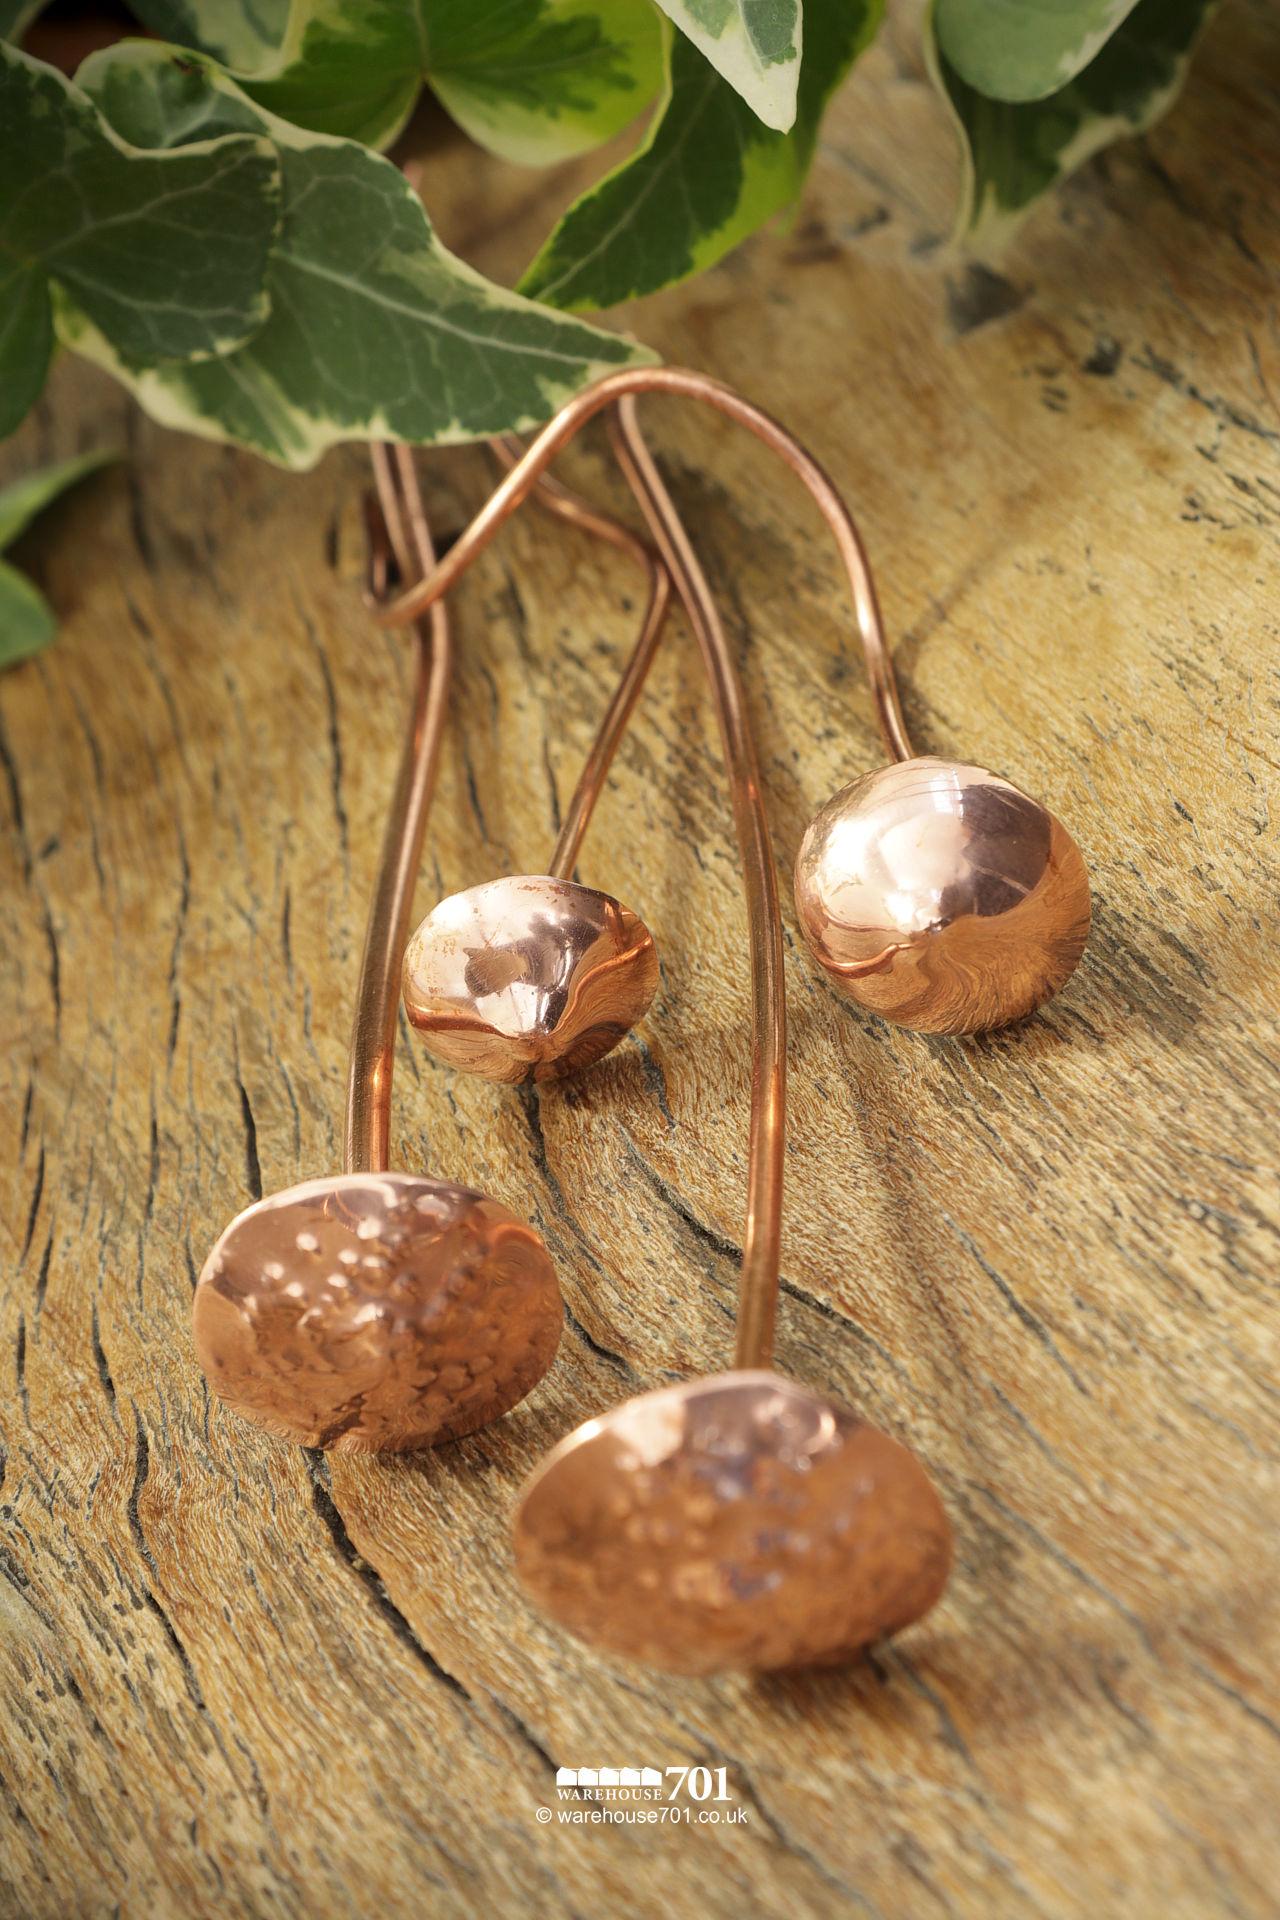 NEW Assorted Hand Crafted Copper Mushroom or Fungi Ornaments #5